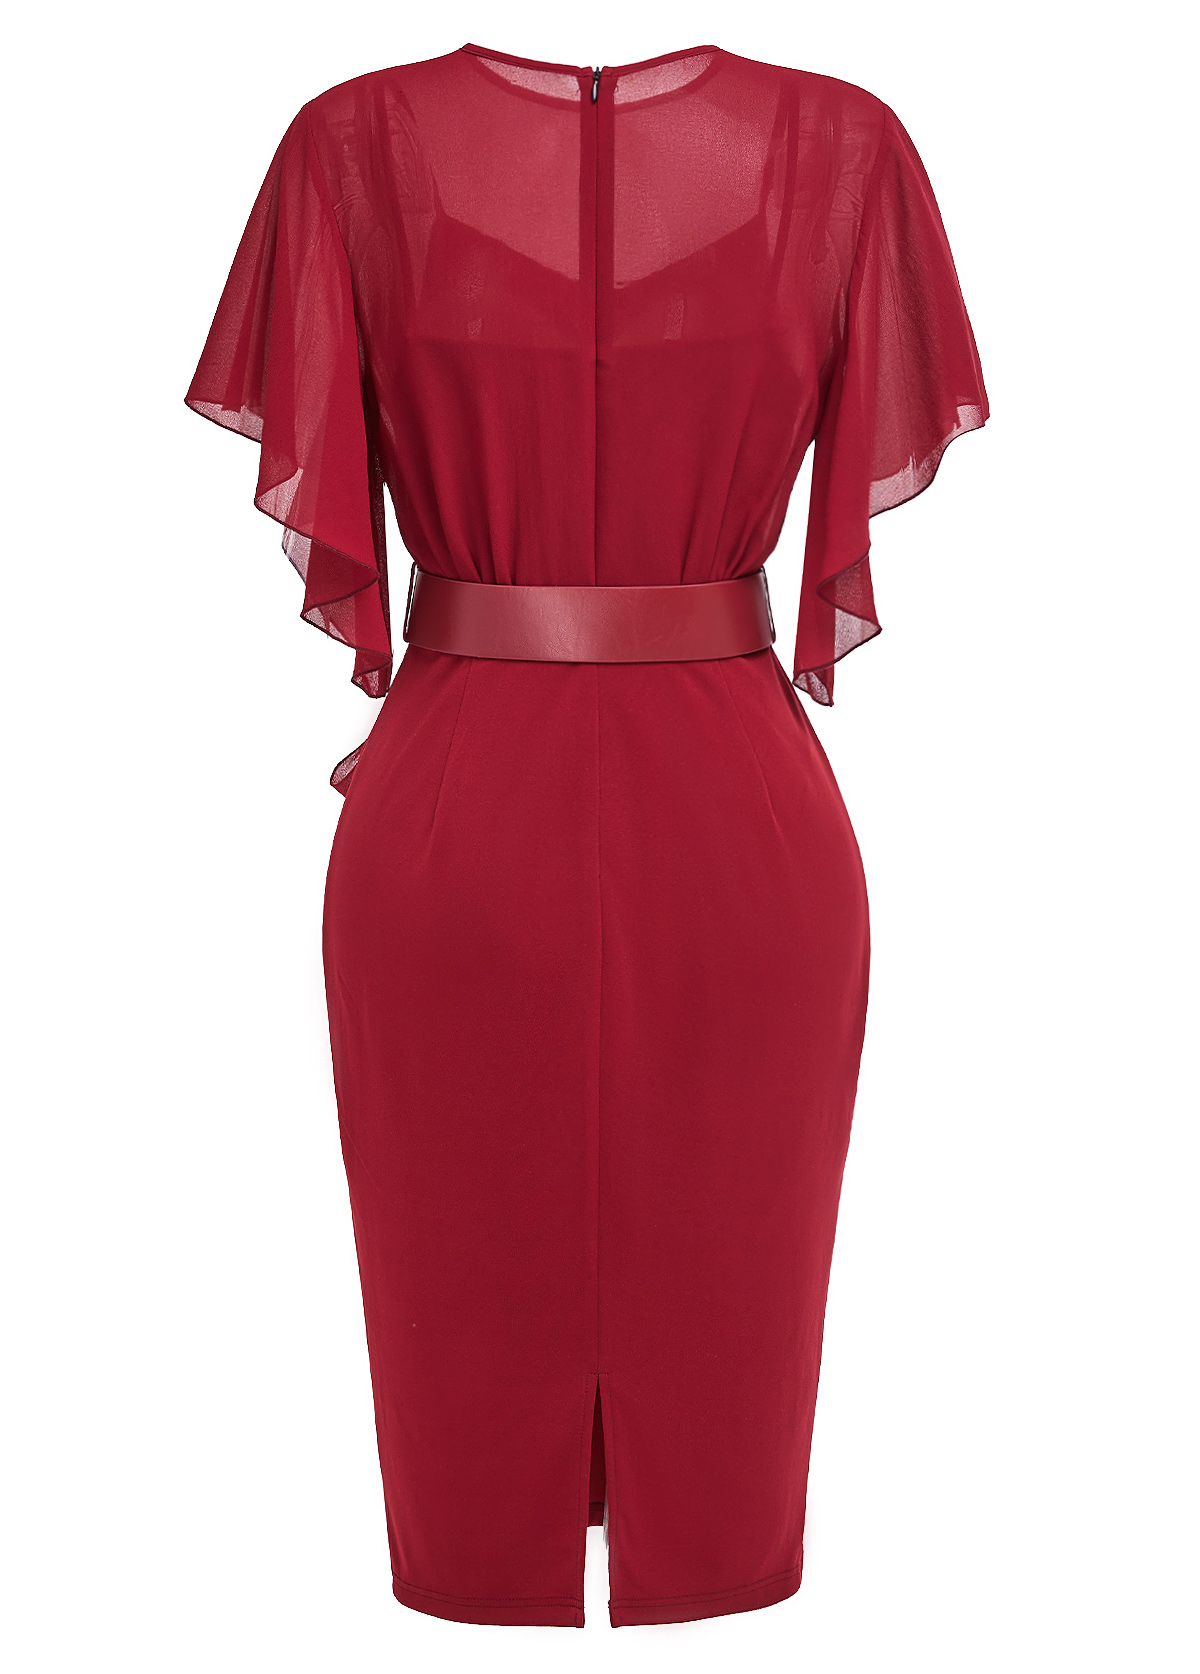 Tie Belted Wine Red Short Sleeve Bodycon Dress